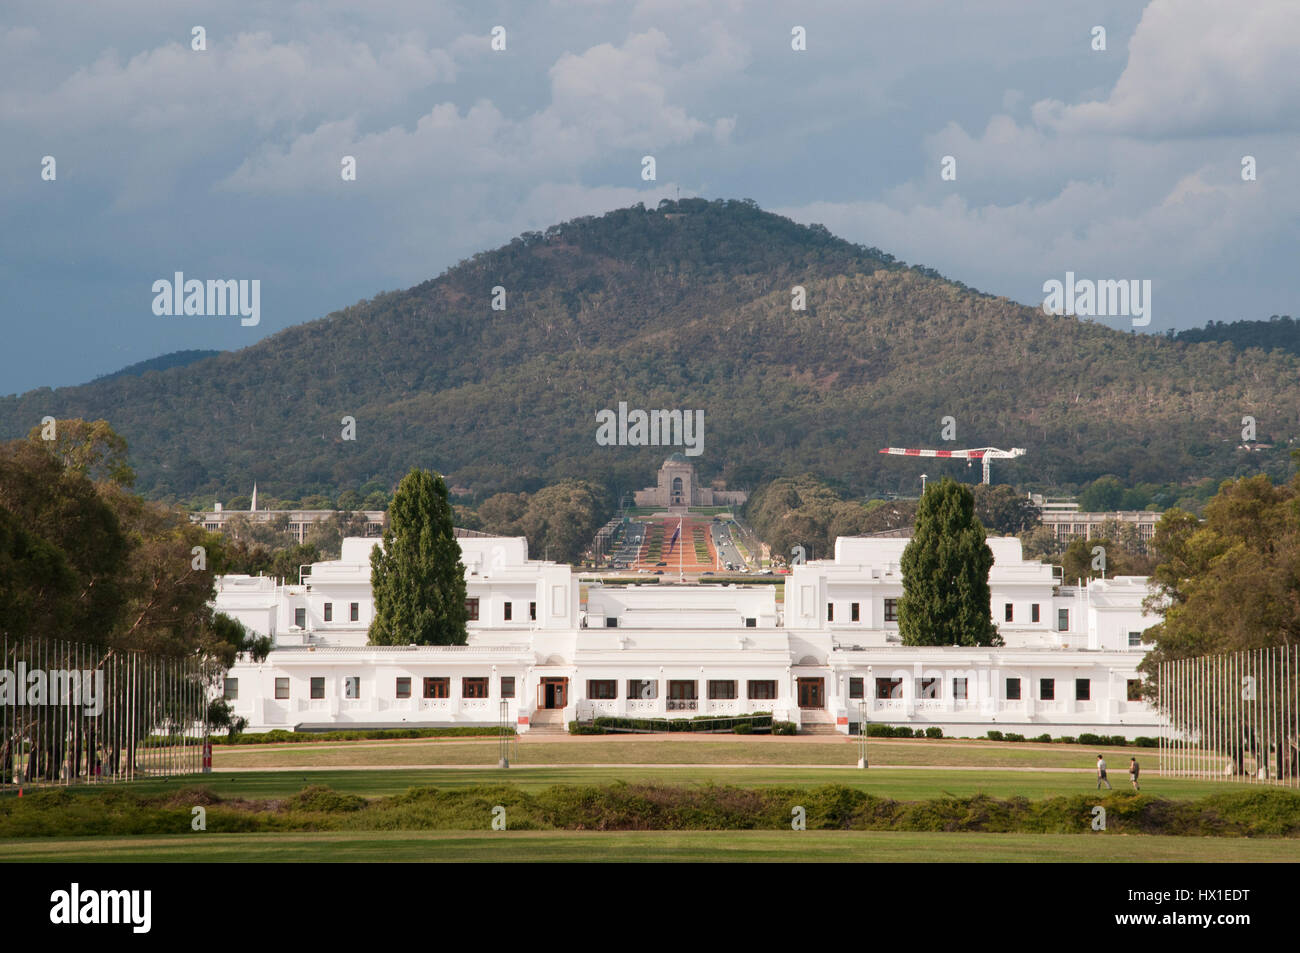 Old Parliament House in Canberra, Australien Stockfoto